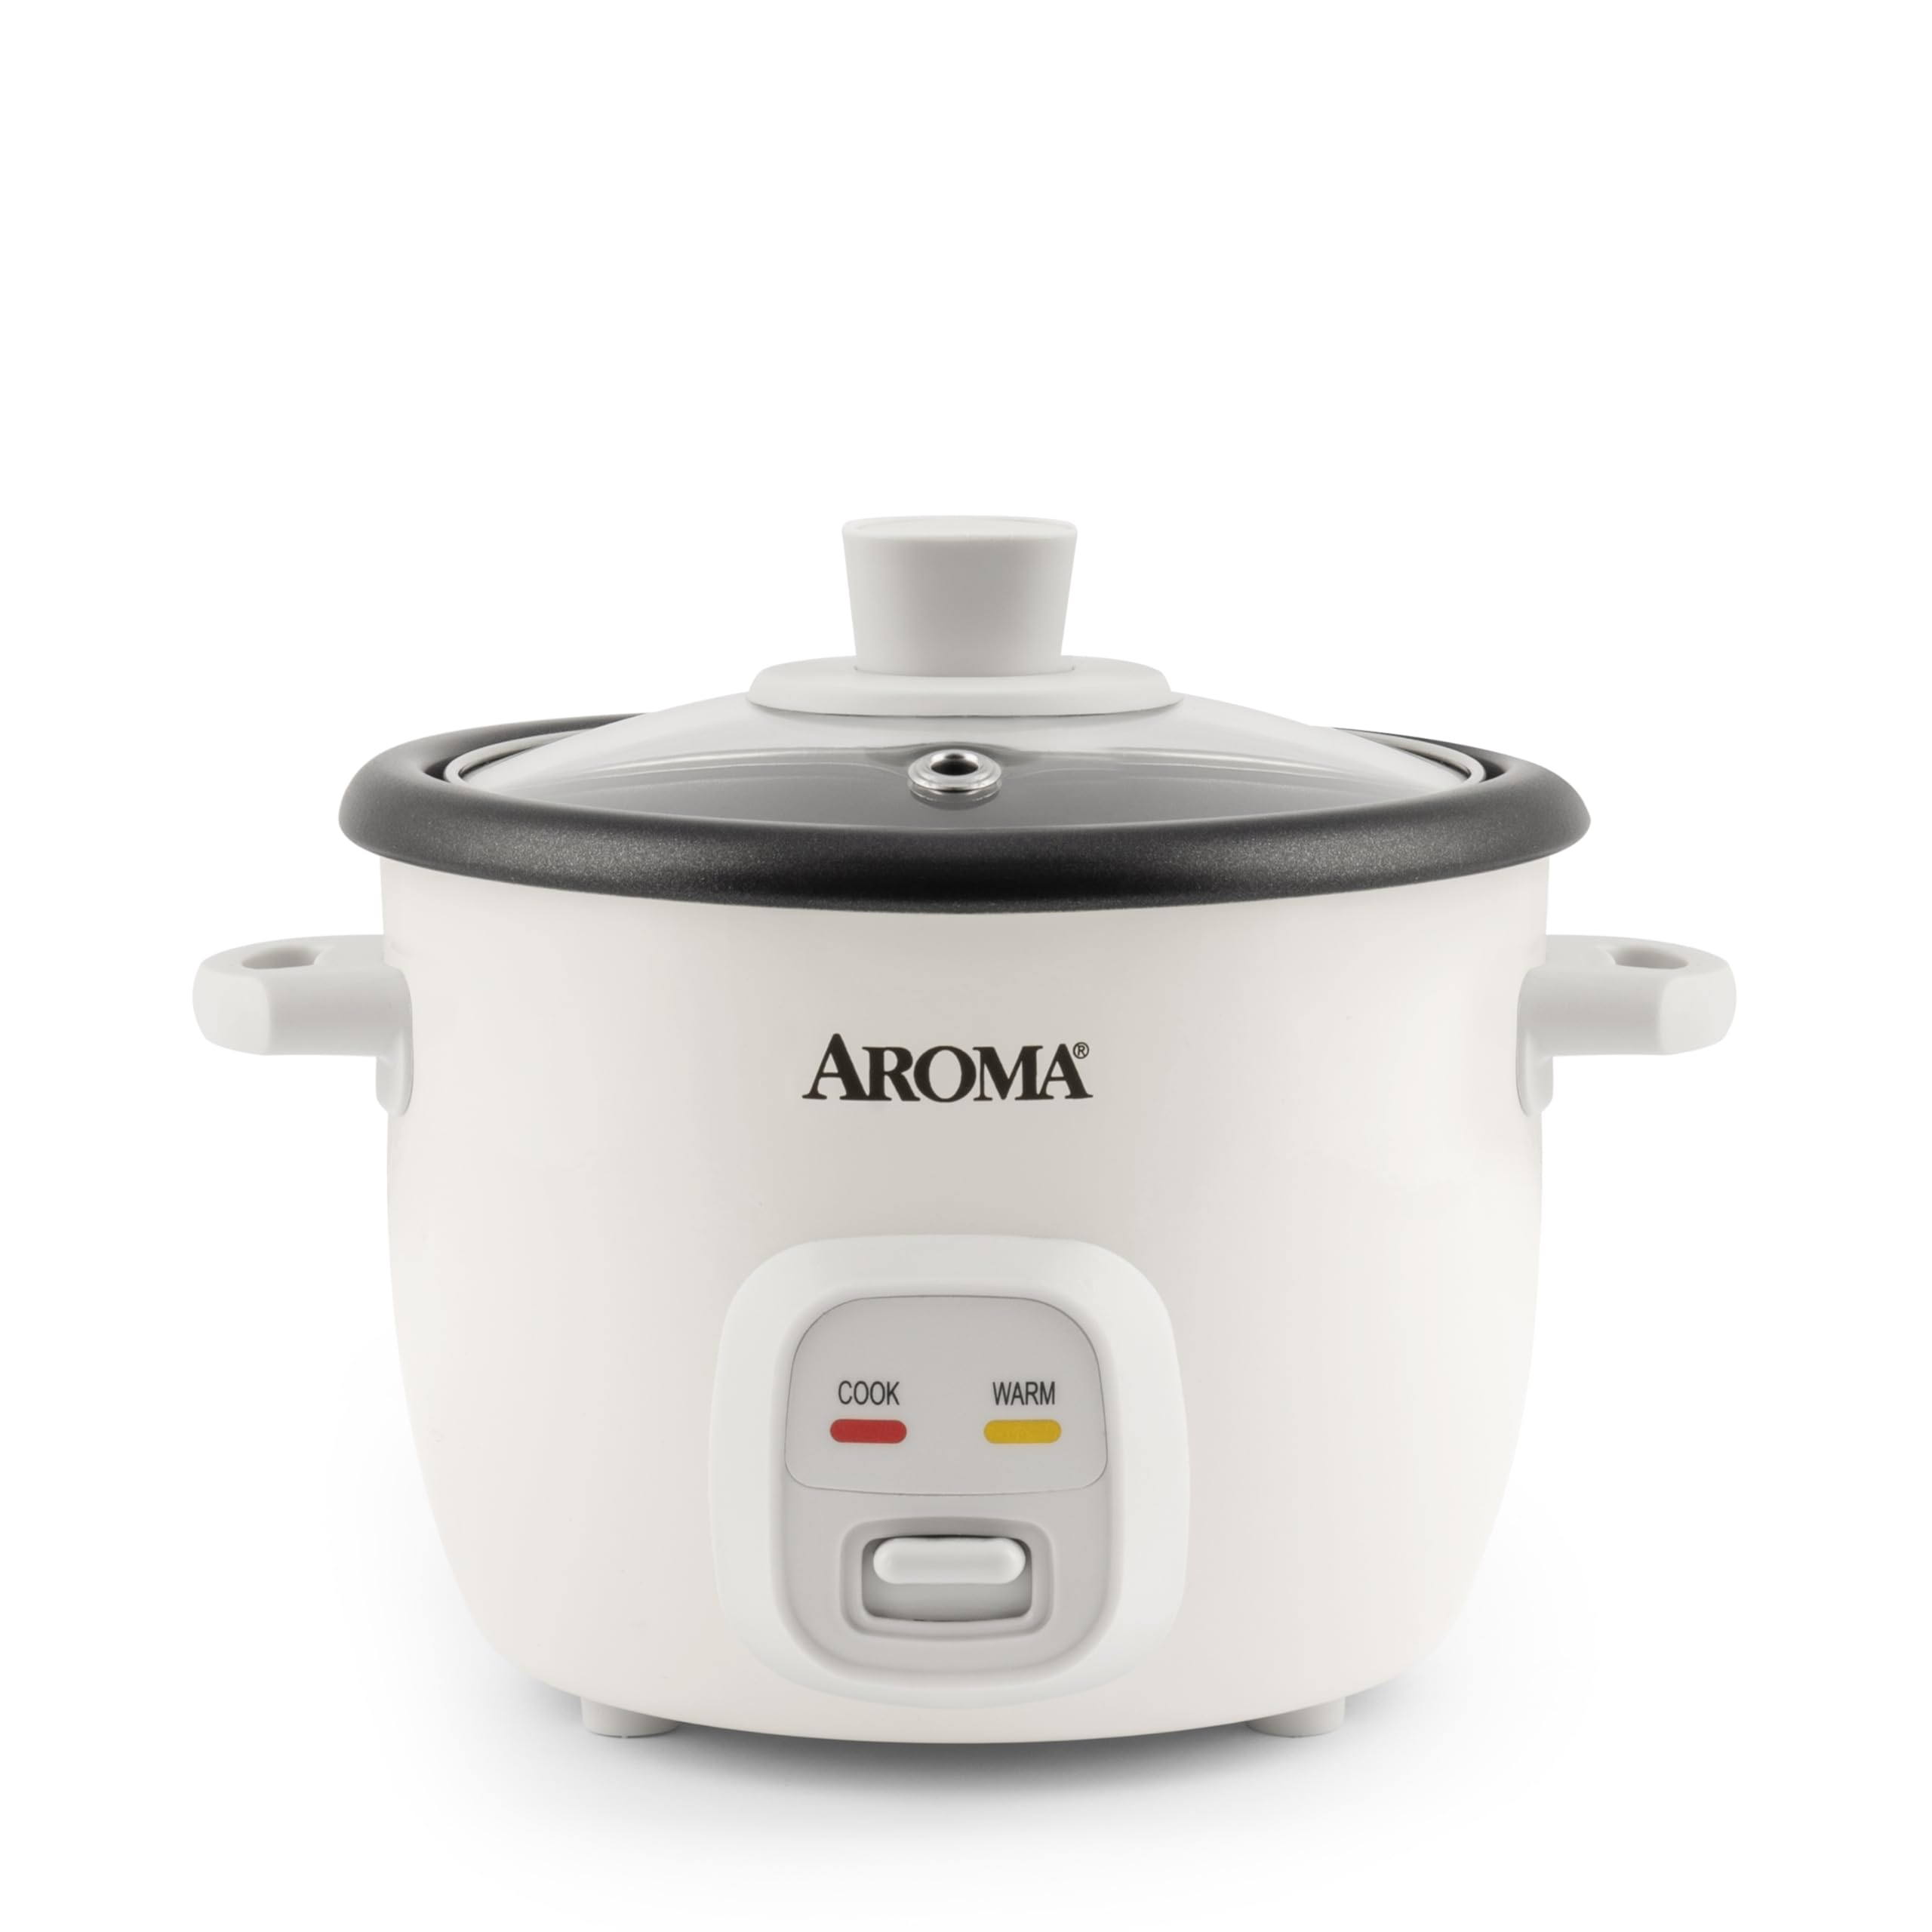 Aroma Housewares 4-Cups (Cooked) / 1Qt. Rice & Grain Cooker (ARC-302NG), White $13.99